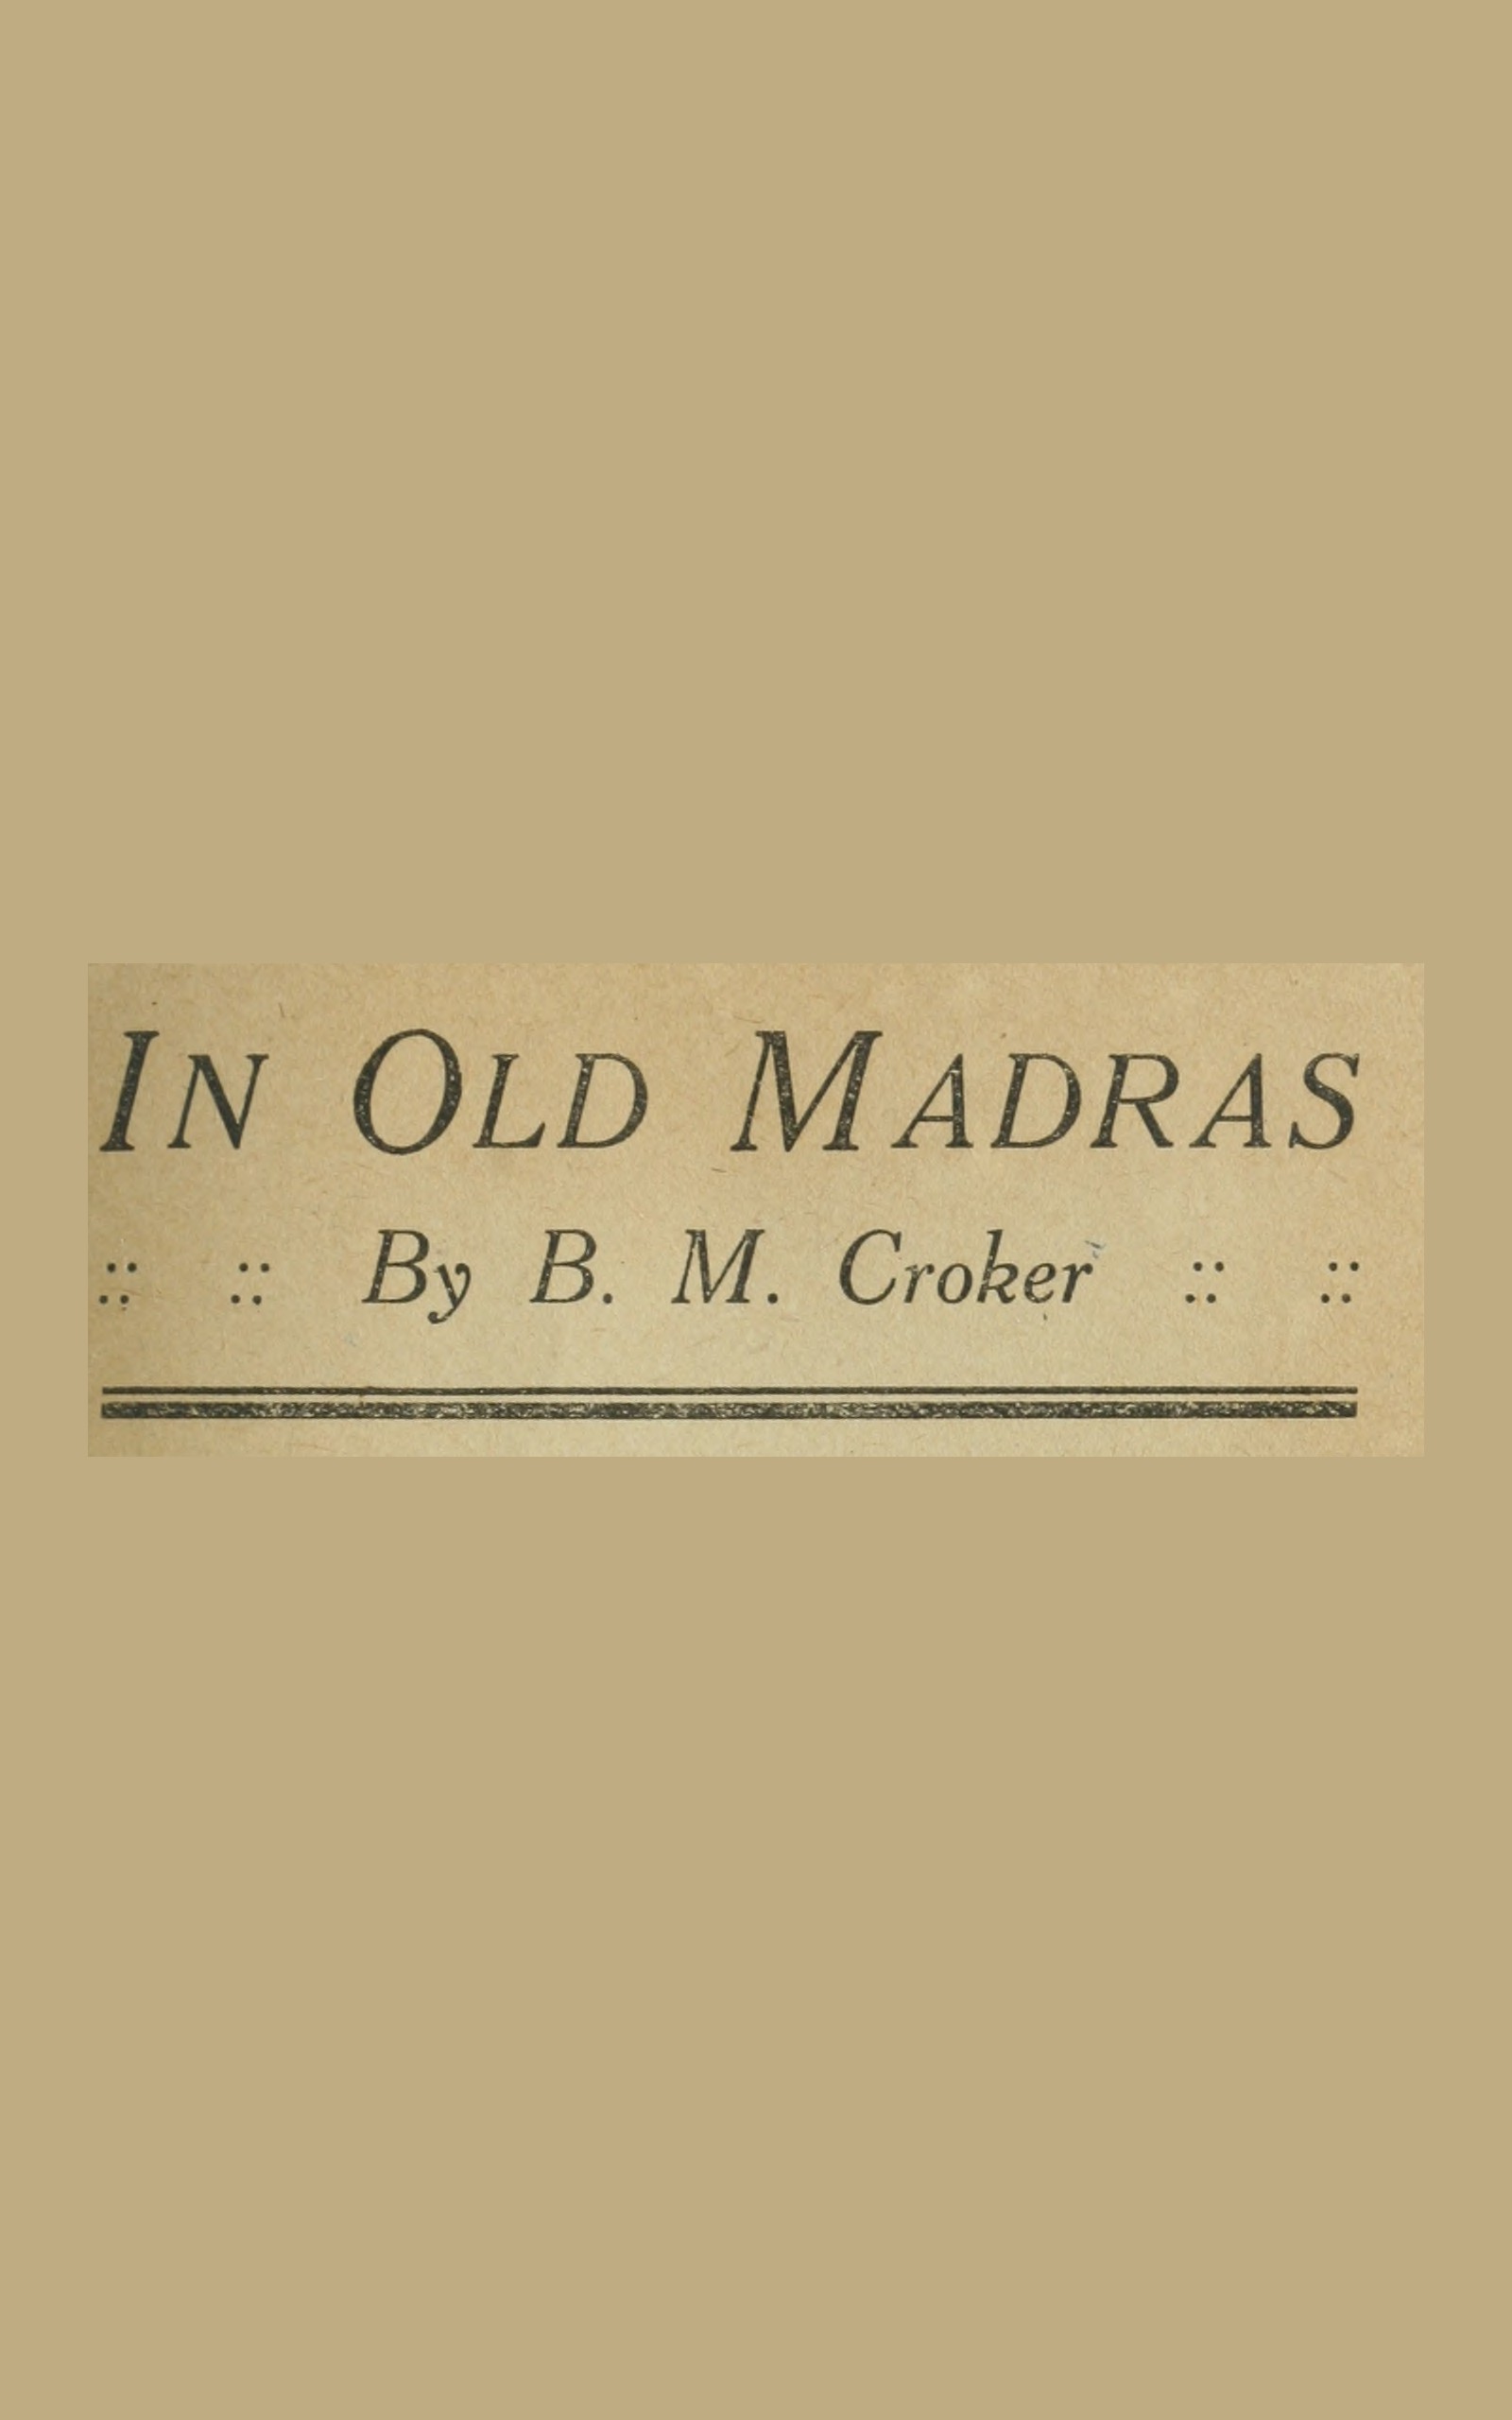 In Old Madras